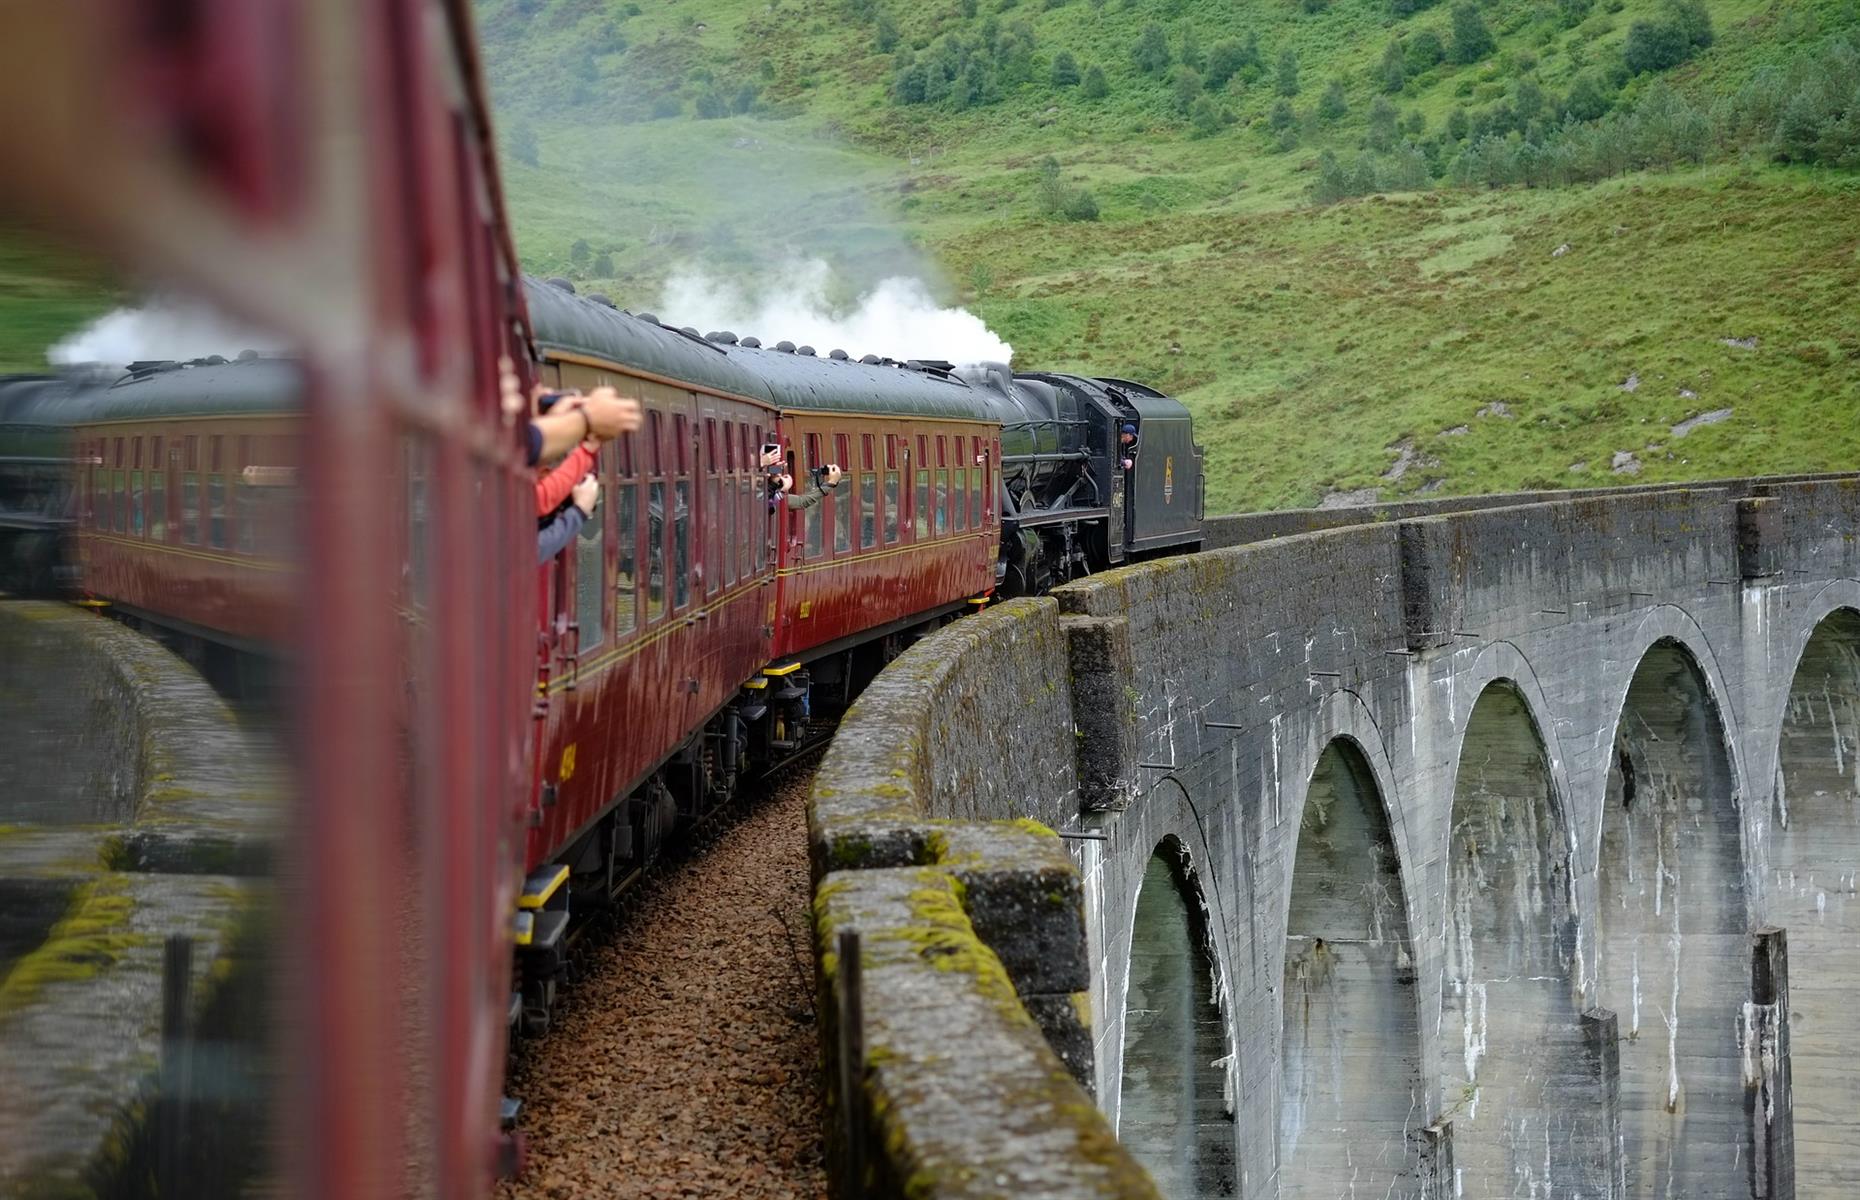 <p>The steam train that chugs to JK Rowling’s fictional Hogwarts School of Witchcraft and Wizardry is real. Passengers board at Fort William and Mallaig and ride the train (called The Jacobite in the muggle world) through 84 glorious miles of Scottish countryside.</p>